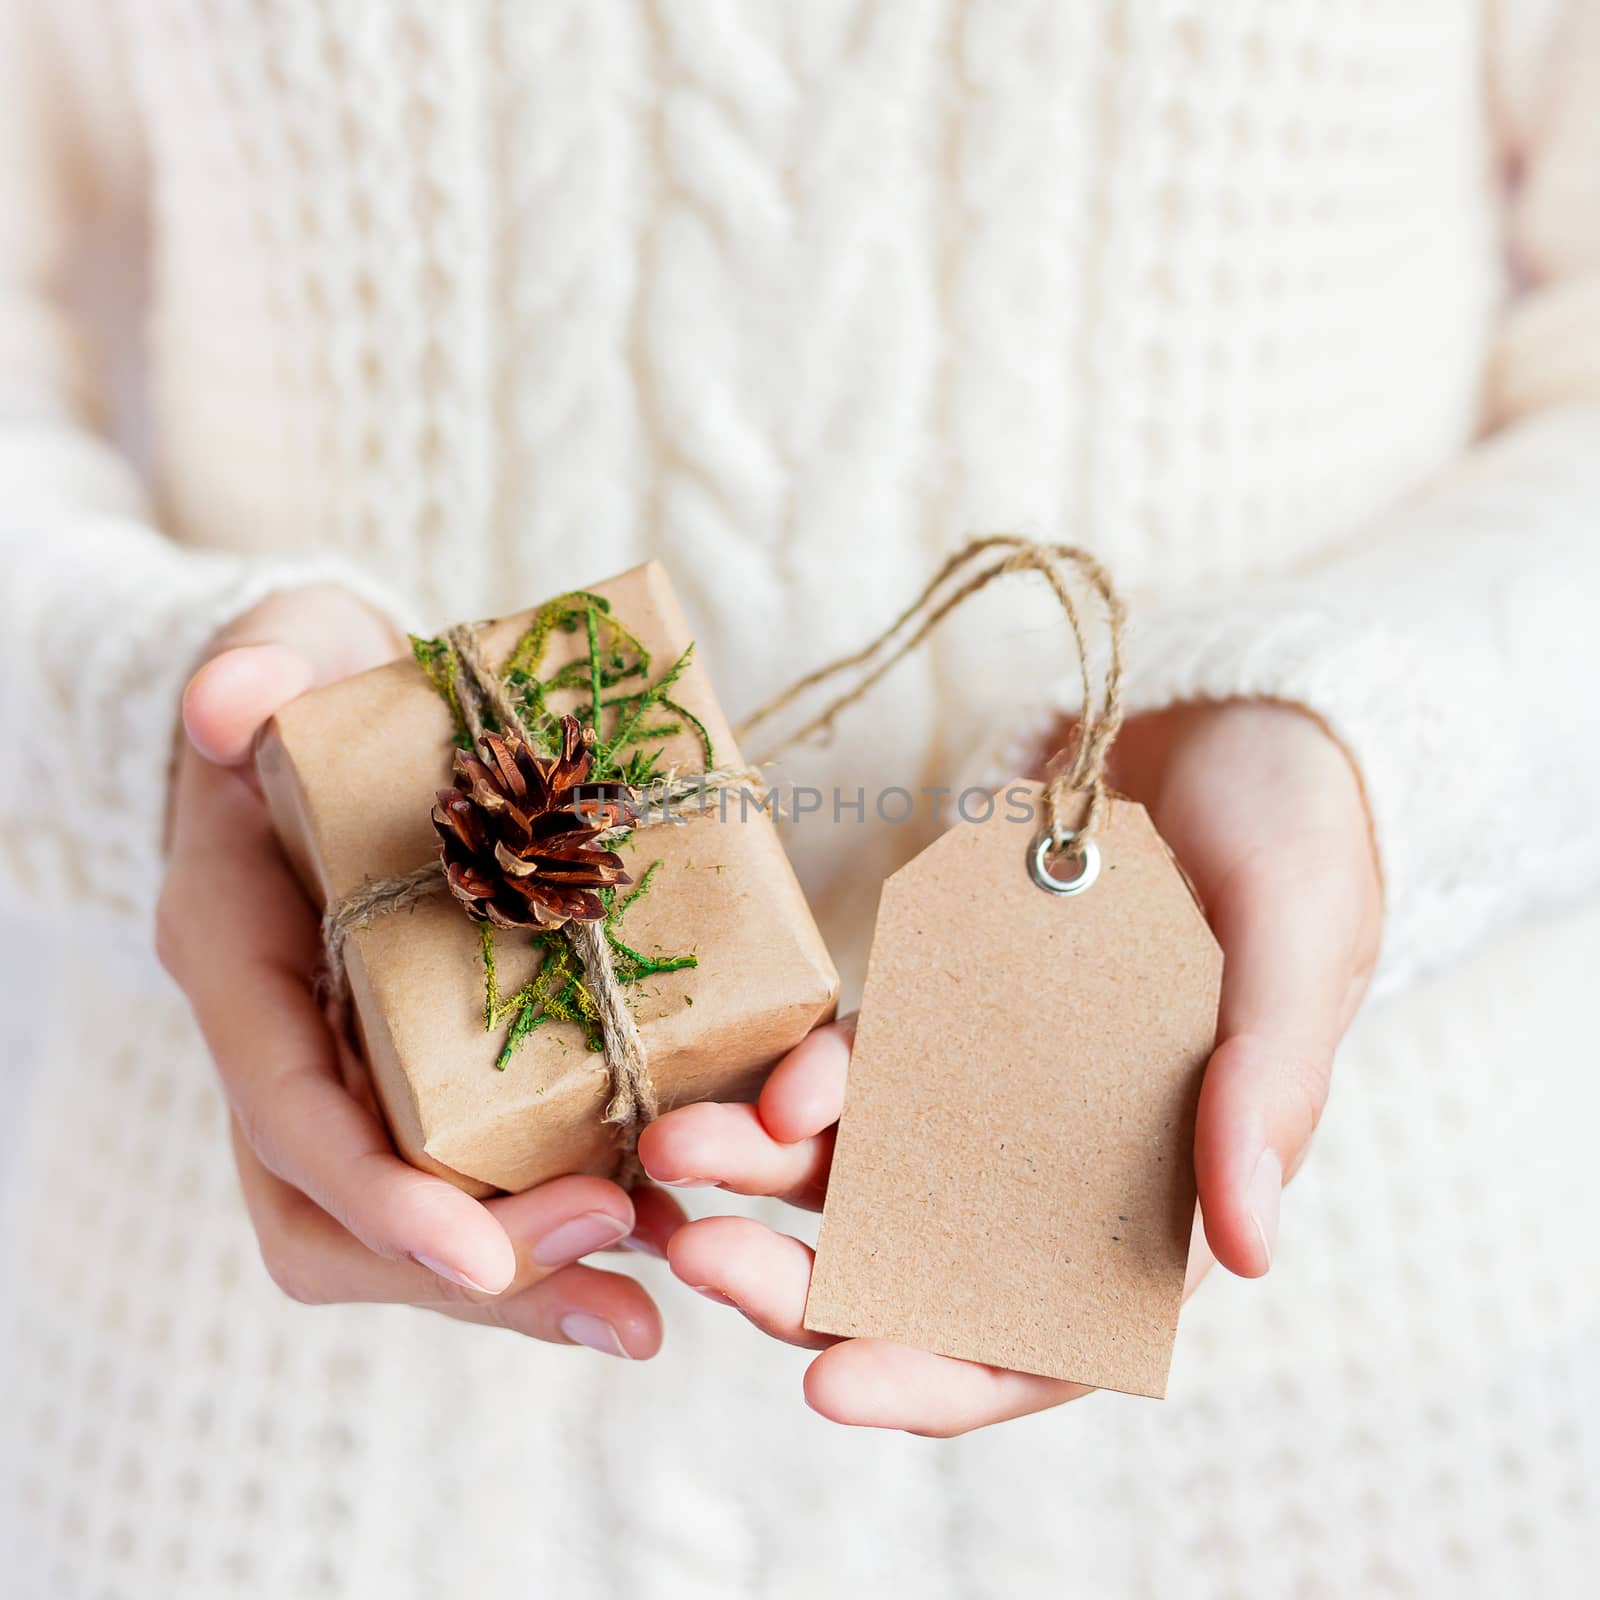 Woman in white knitted sweater is holding a present packed in craft paper with pine cona and tag. DIY Christmas or New Year, St. Valentine Day gift.